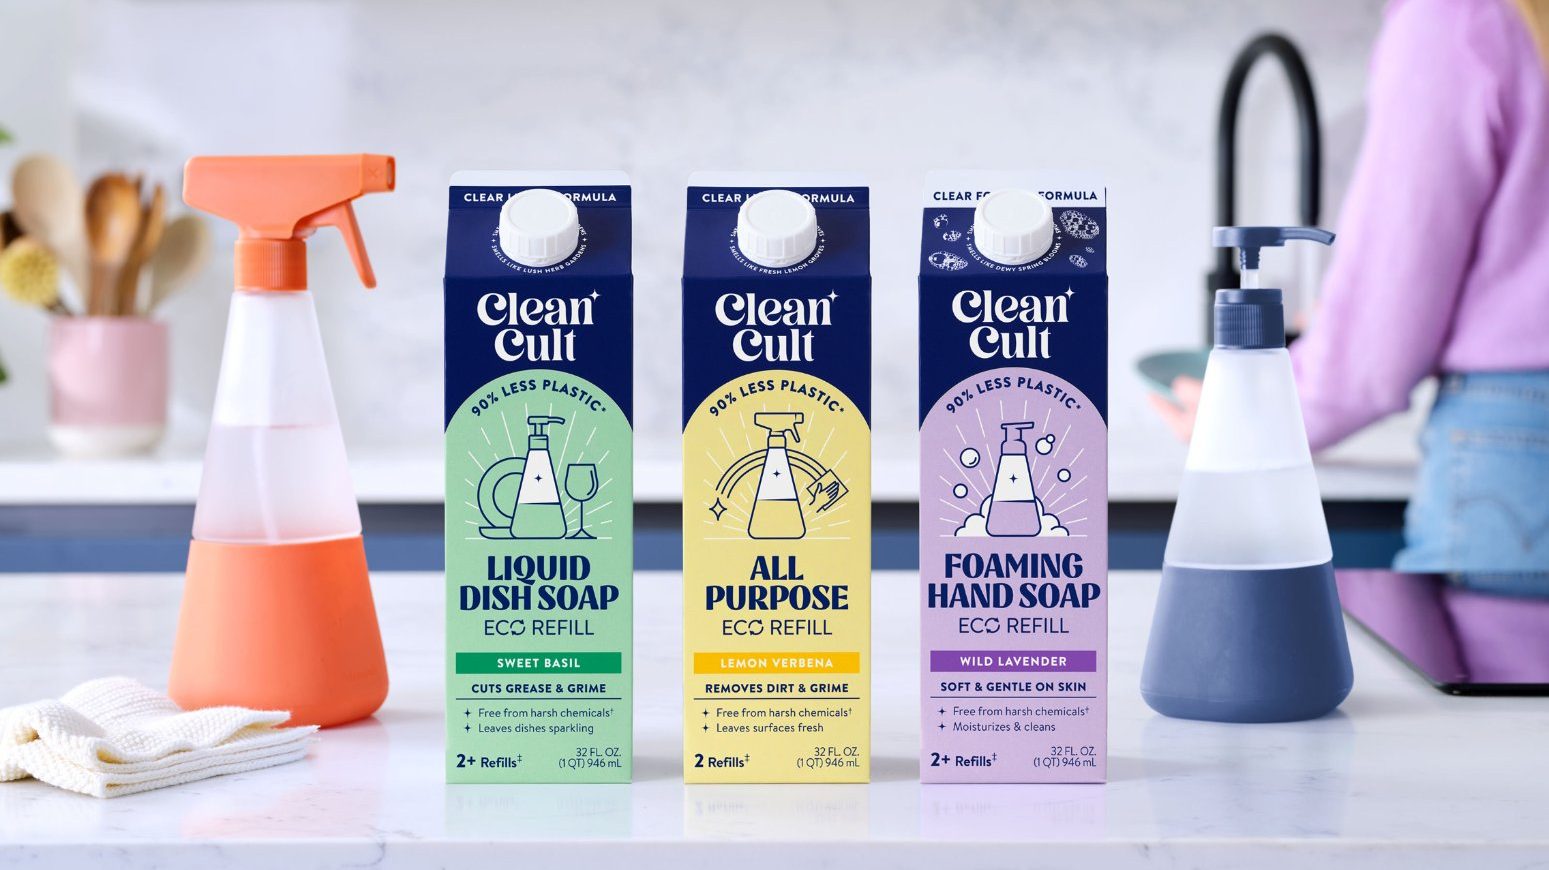 Robot Food Refreshes Cleancult As Brand Expands Retail Distribution